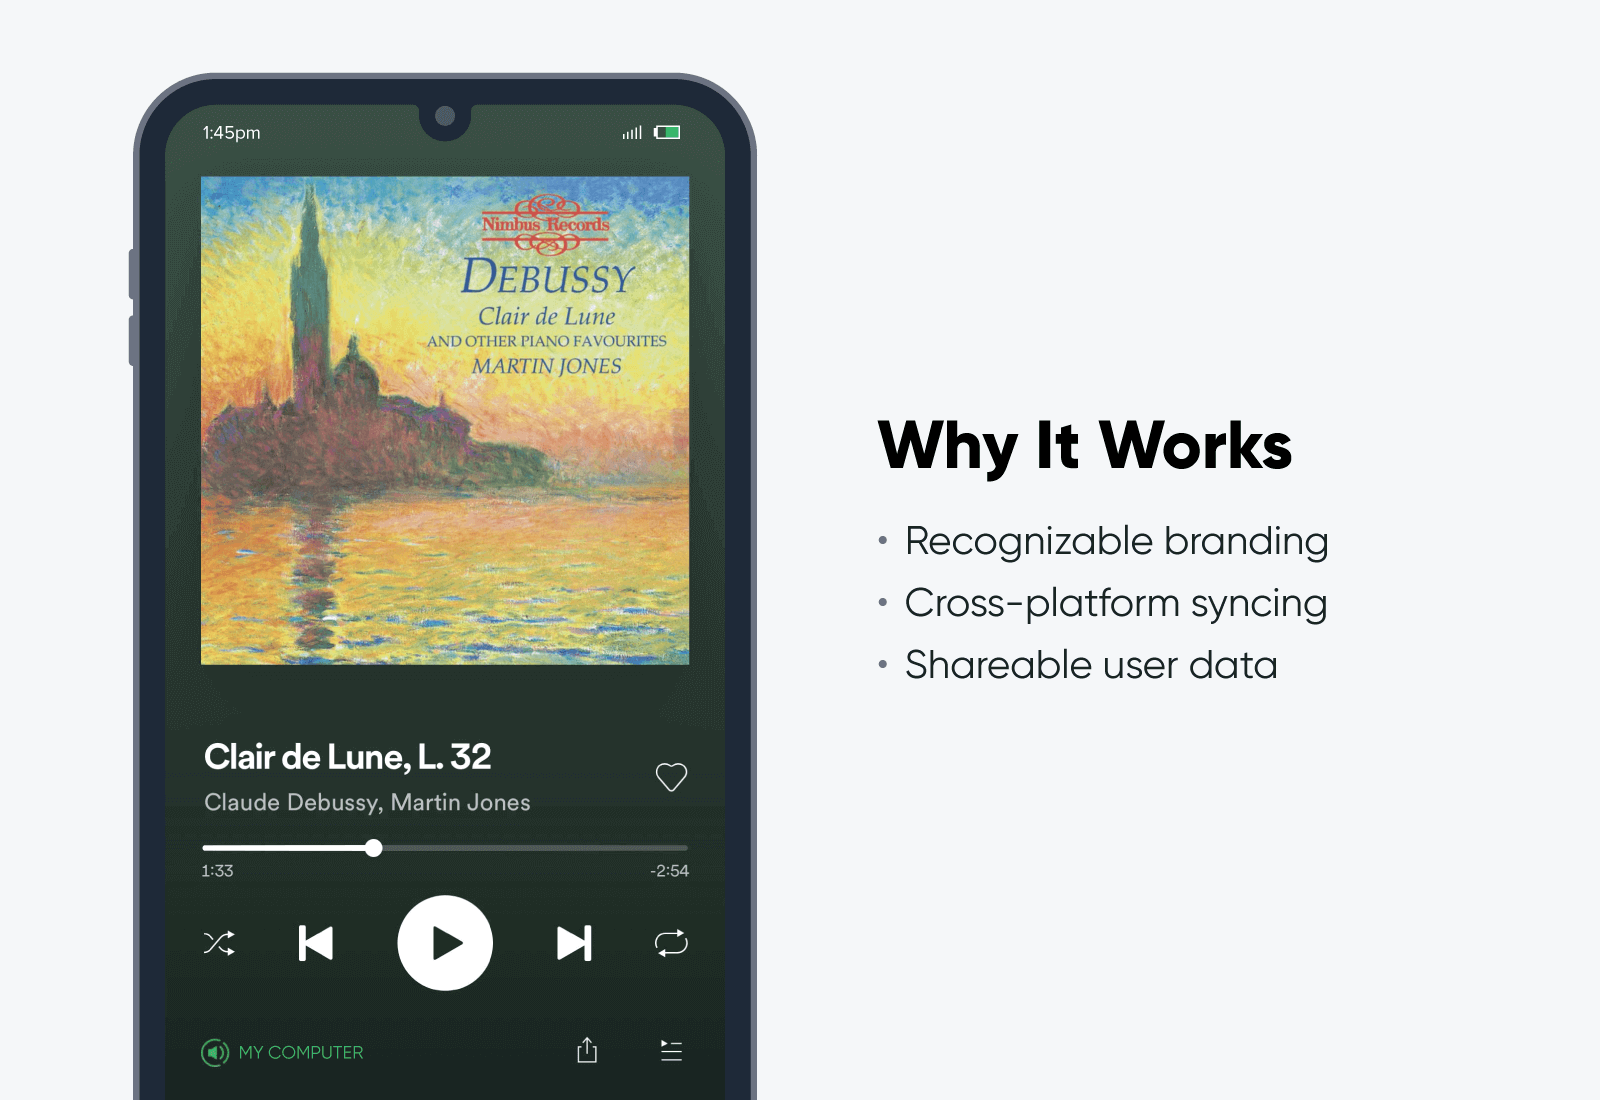 Mockup of a Spotify mobile app screen illustrating their cross-platform syncing with bullet points that explain why it works as an omnichannel marketing strategy.